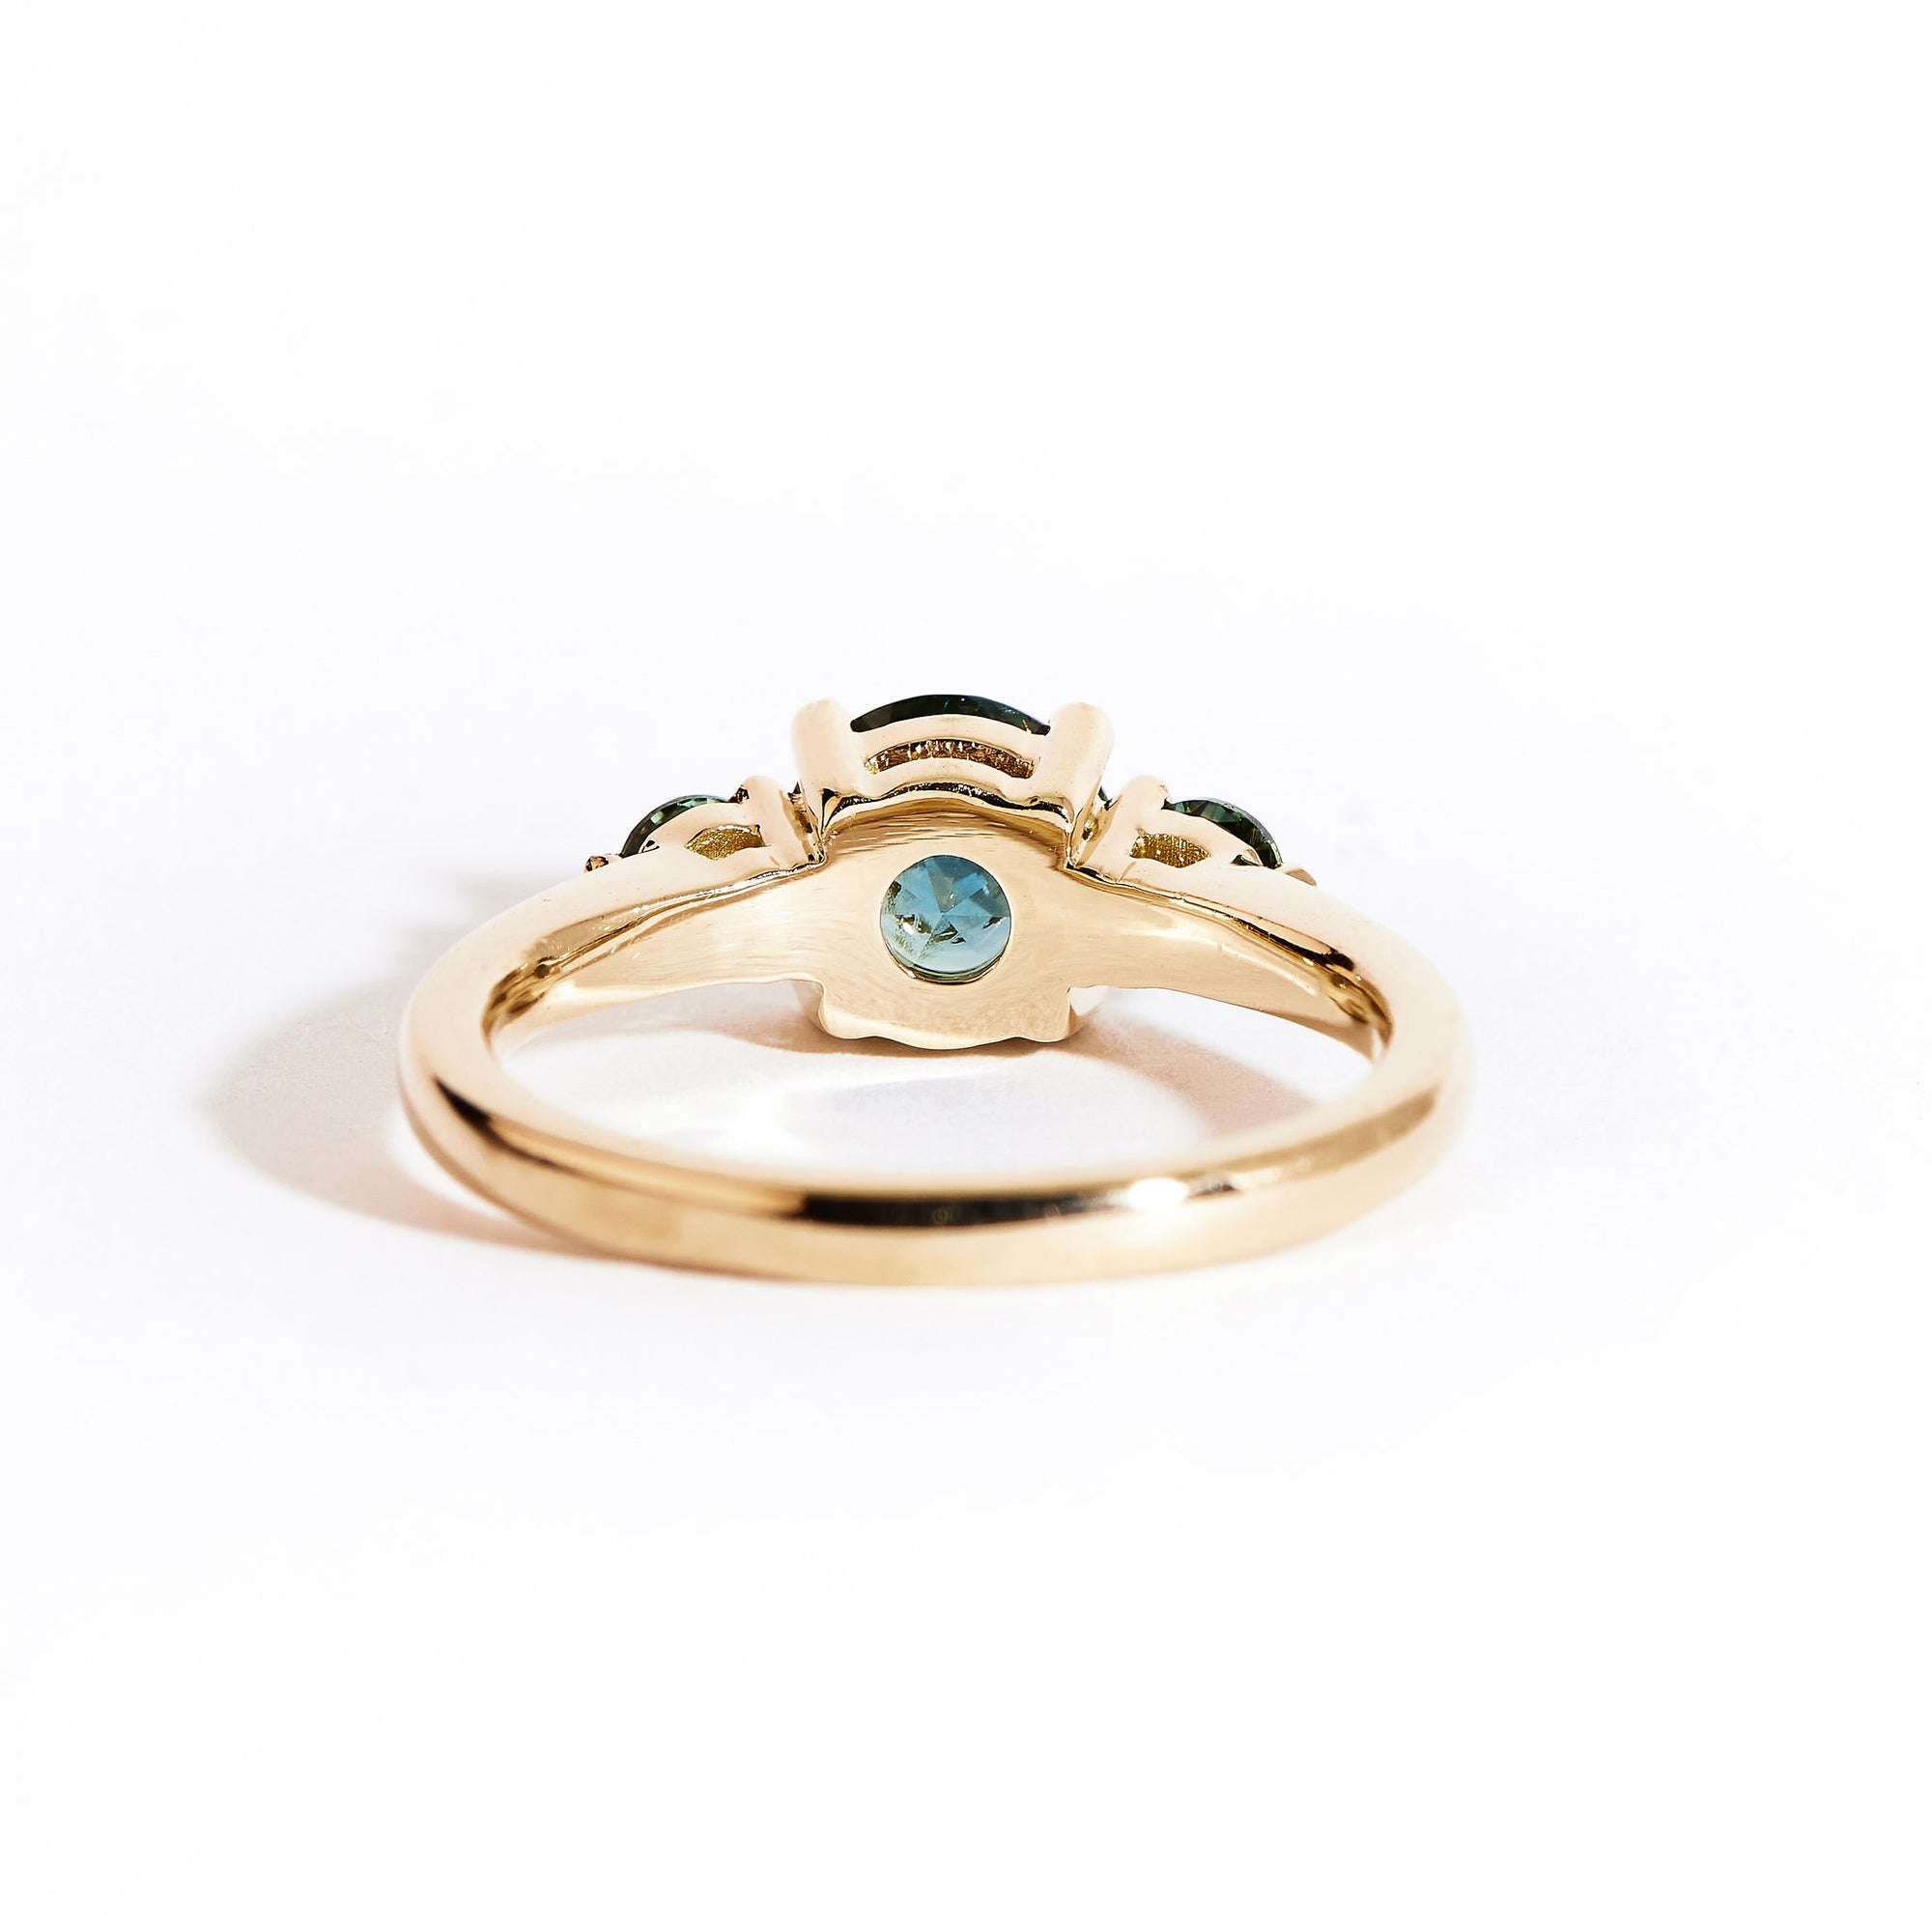 Blue and Teal Sapphire Engagement Ring in 18ct Yellow Gold